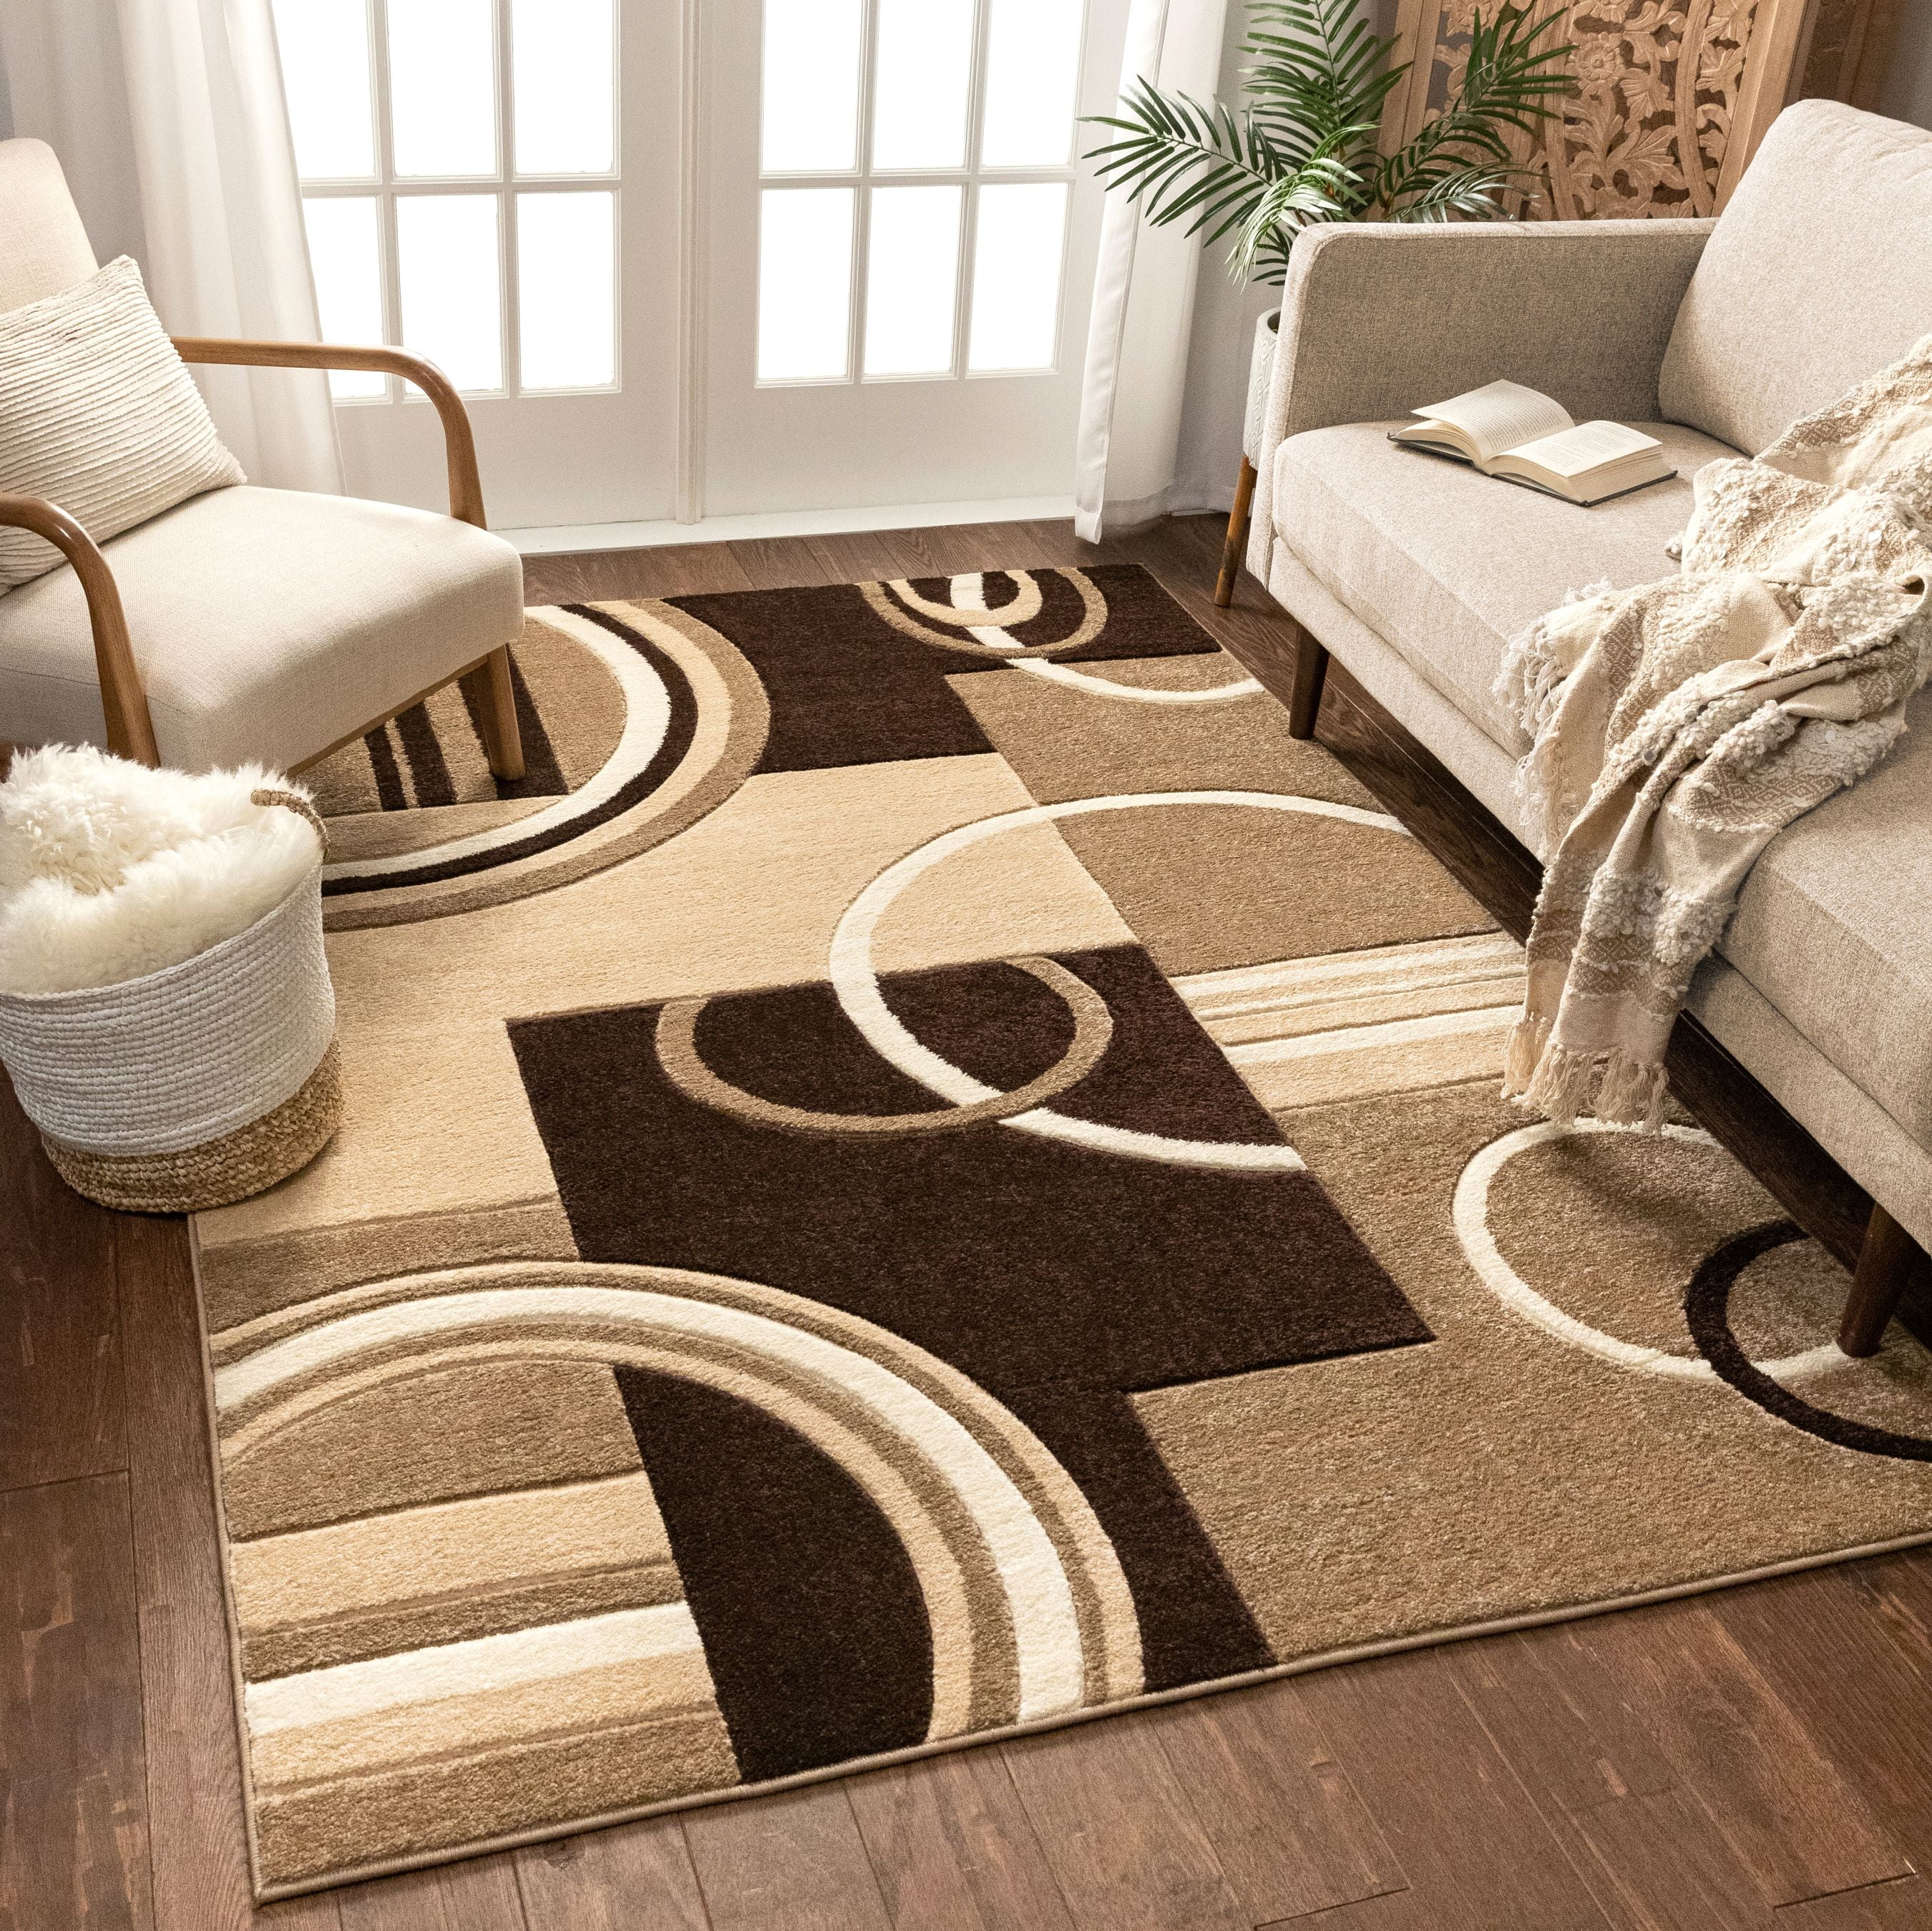 Taupe Light Brown Square Living Room Modern Carpets Extra Large Small Floor Rugs